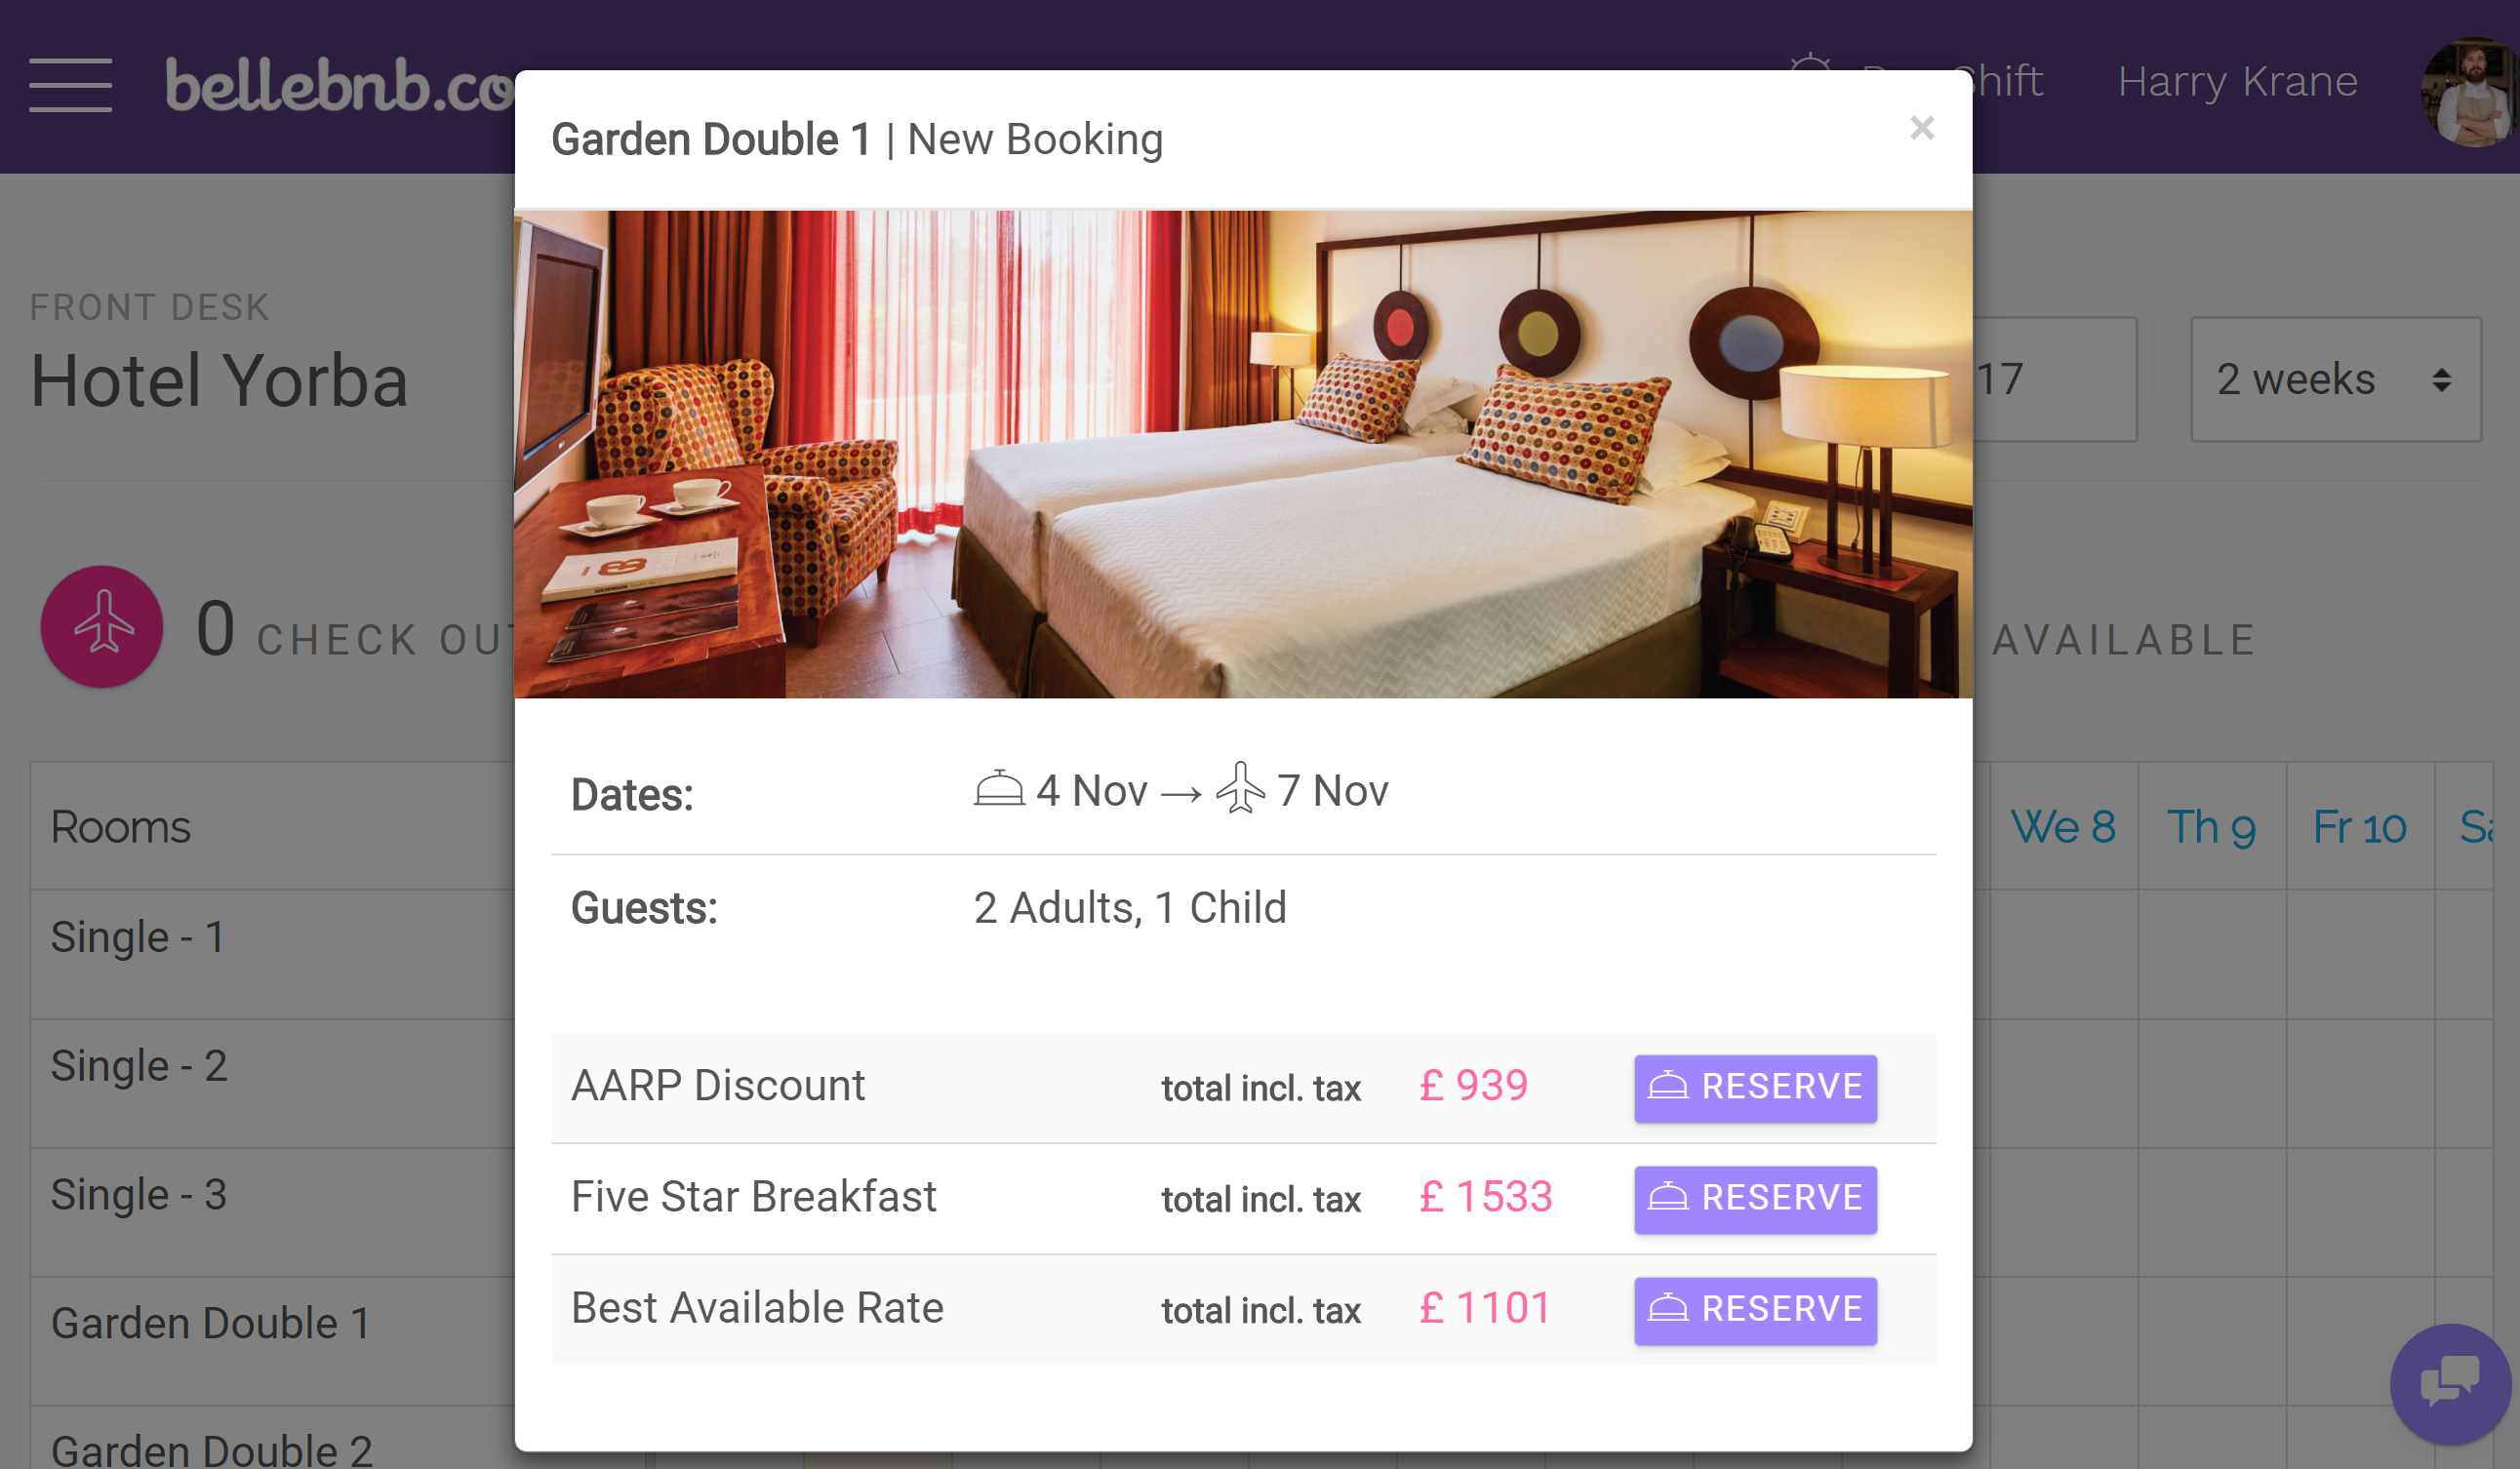 Hospitality Management Platform:
                    
                    Bellebnb is a hotel management platform that includes a PMS, Channel Manager, Booking Engine, Concierge Service, and Payment Processor. Our platform will help you sell more rooms and improve revenue per booking by helping you upsell products and services, and encourage guests to return and book with you directly.